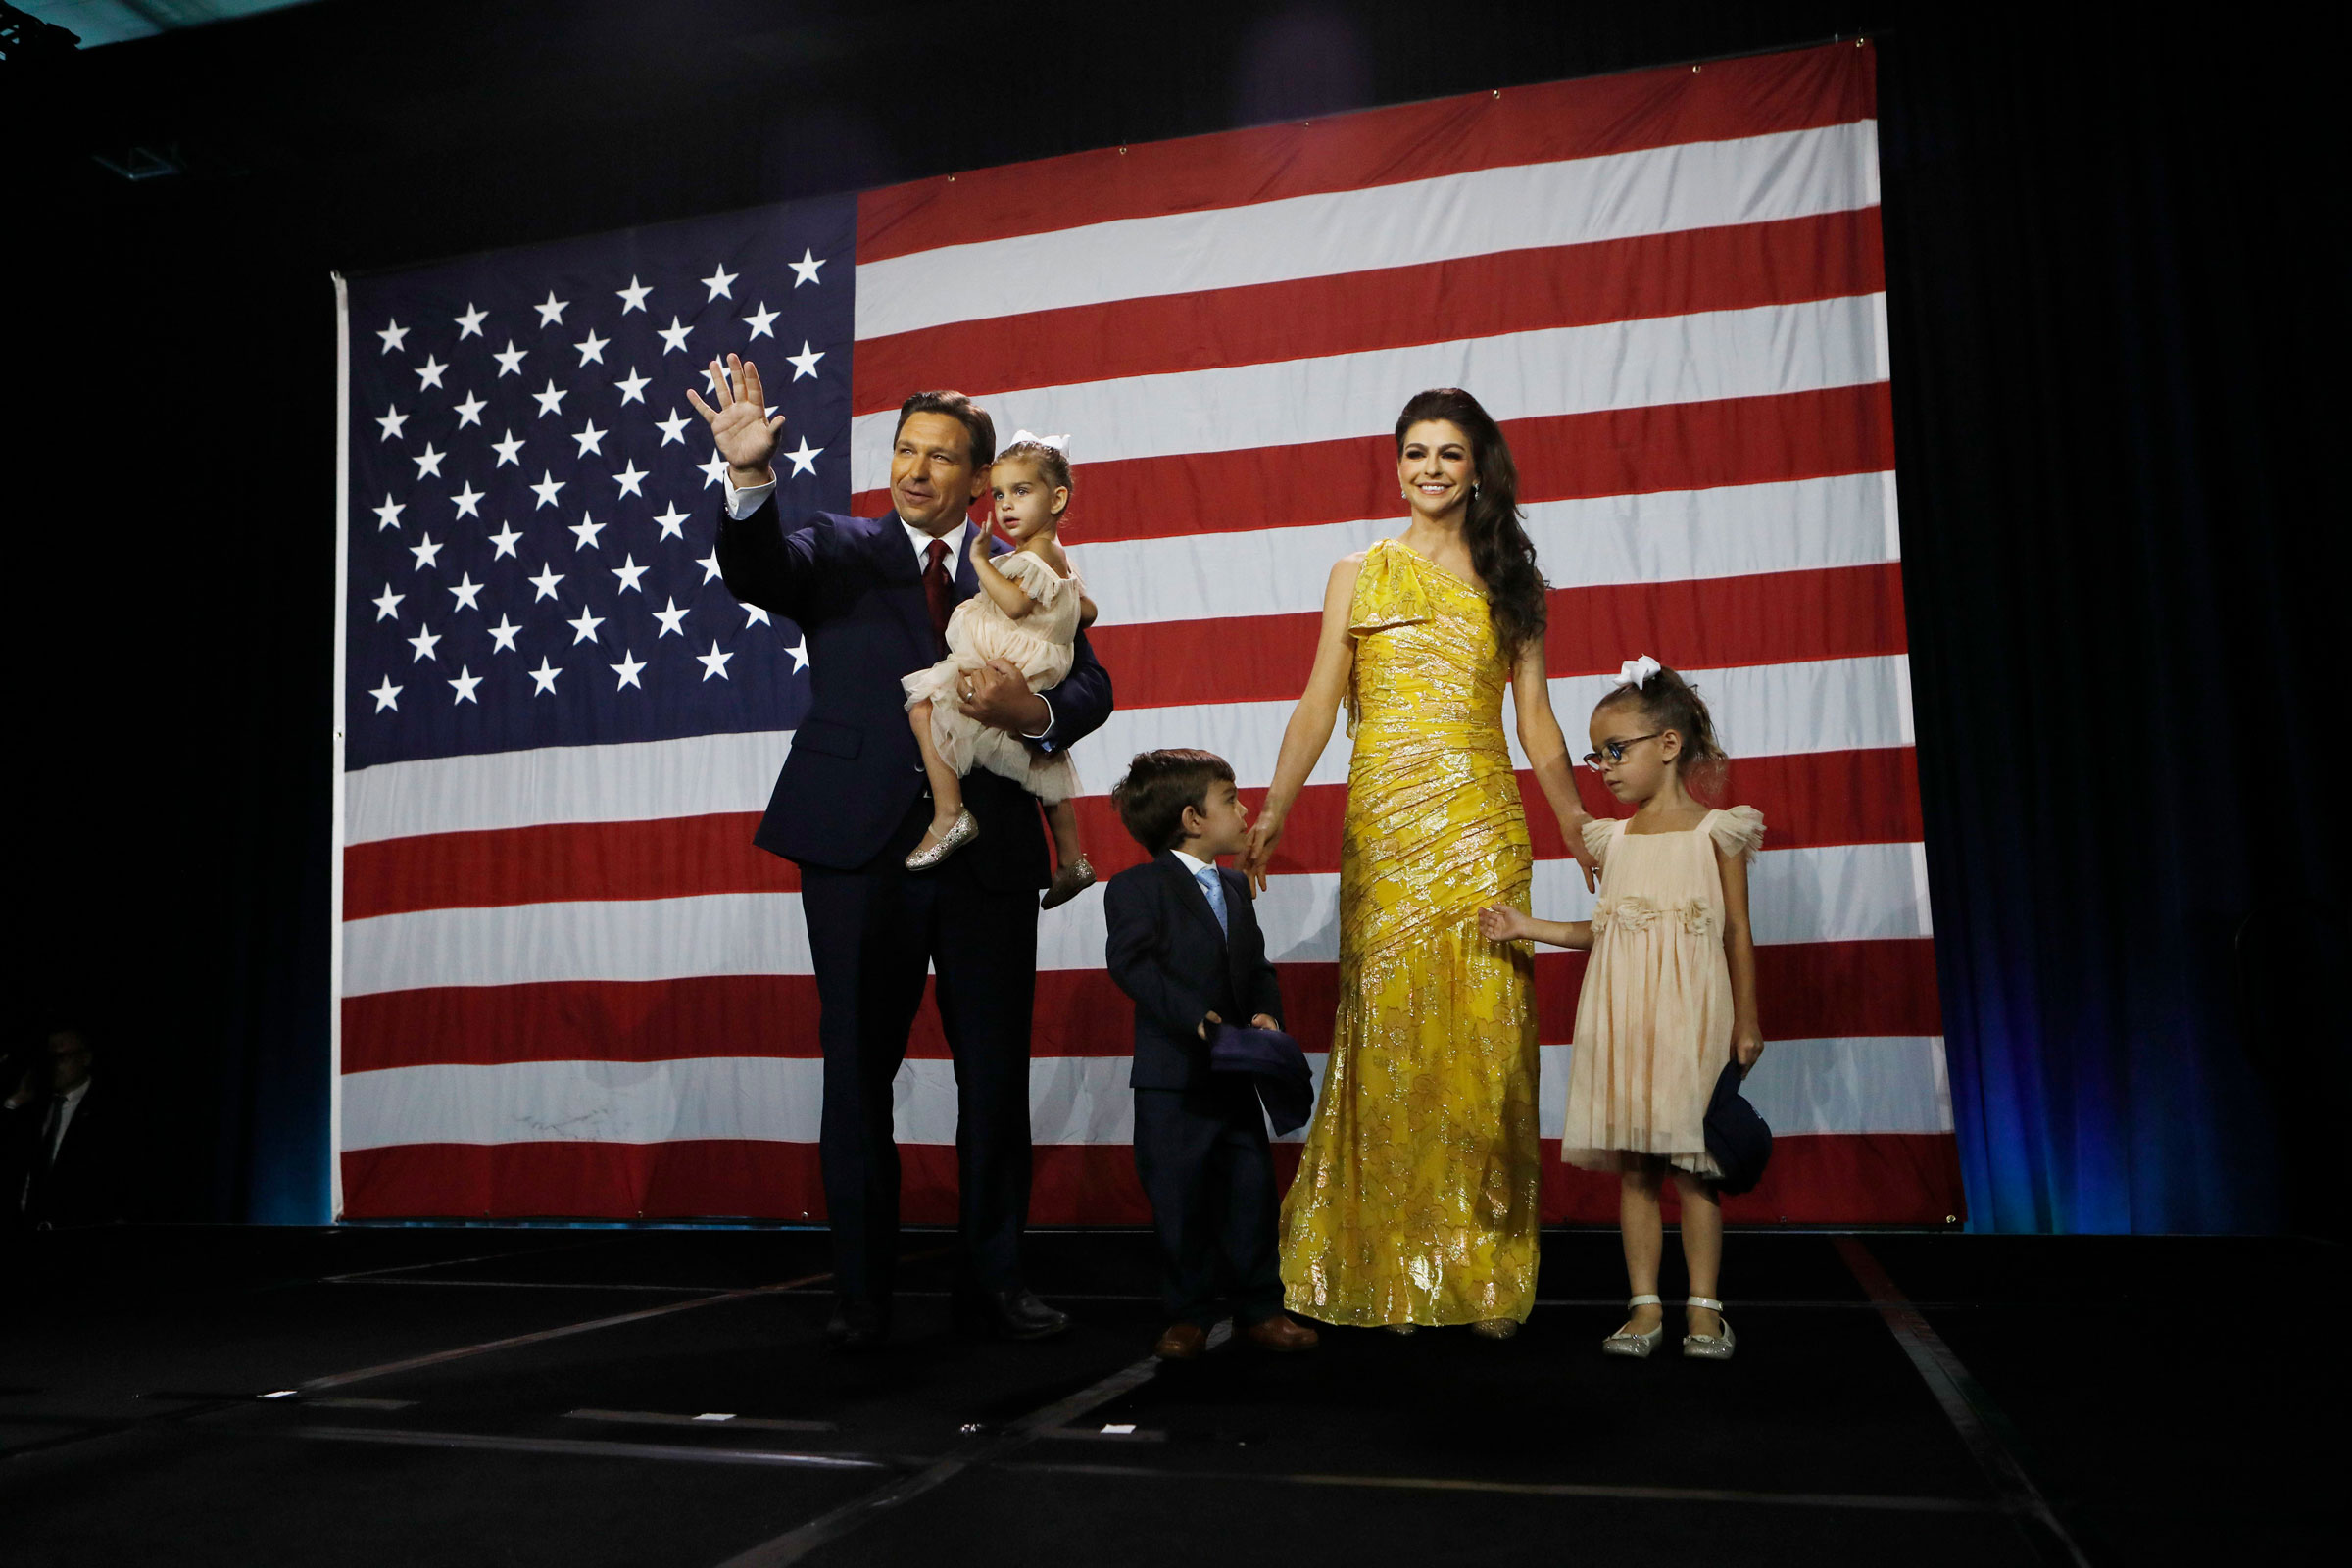 Florida Gov. Ron DeSantis, his wife Casey DeSantis and their children walk on stage to celebrate victory over Democratic gubernatorial candidate Rep. Charlie Crist during an election night watch party at the Tampa Convention Center on November 8, 2022 in Tampa, Florida. DeSantis was the projected winner by a double-digit lead. (Octavio Jones—Getty Images)